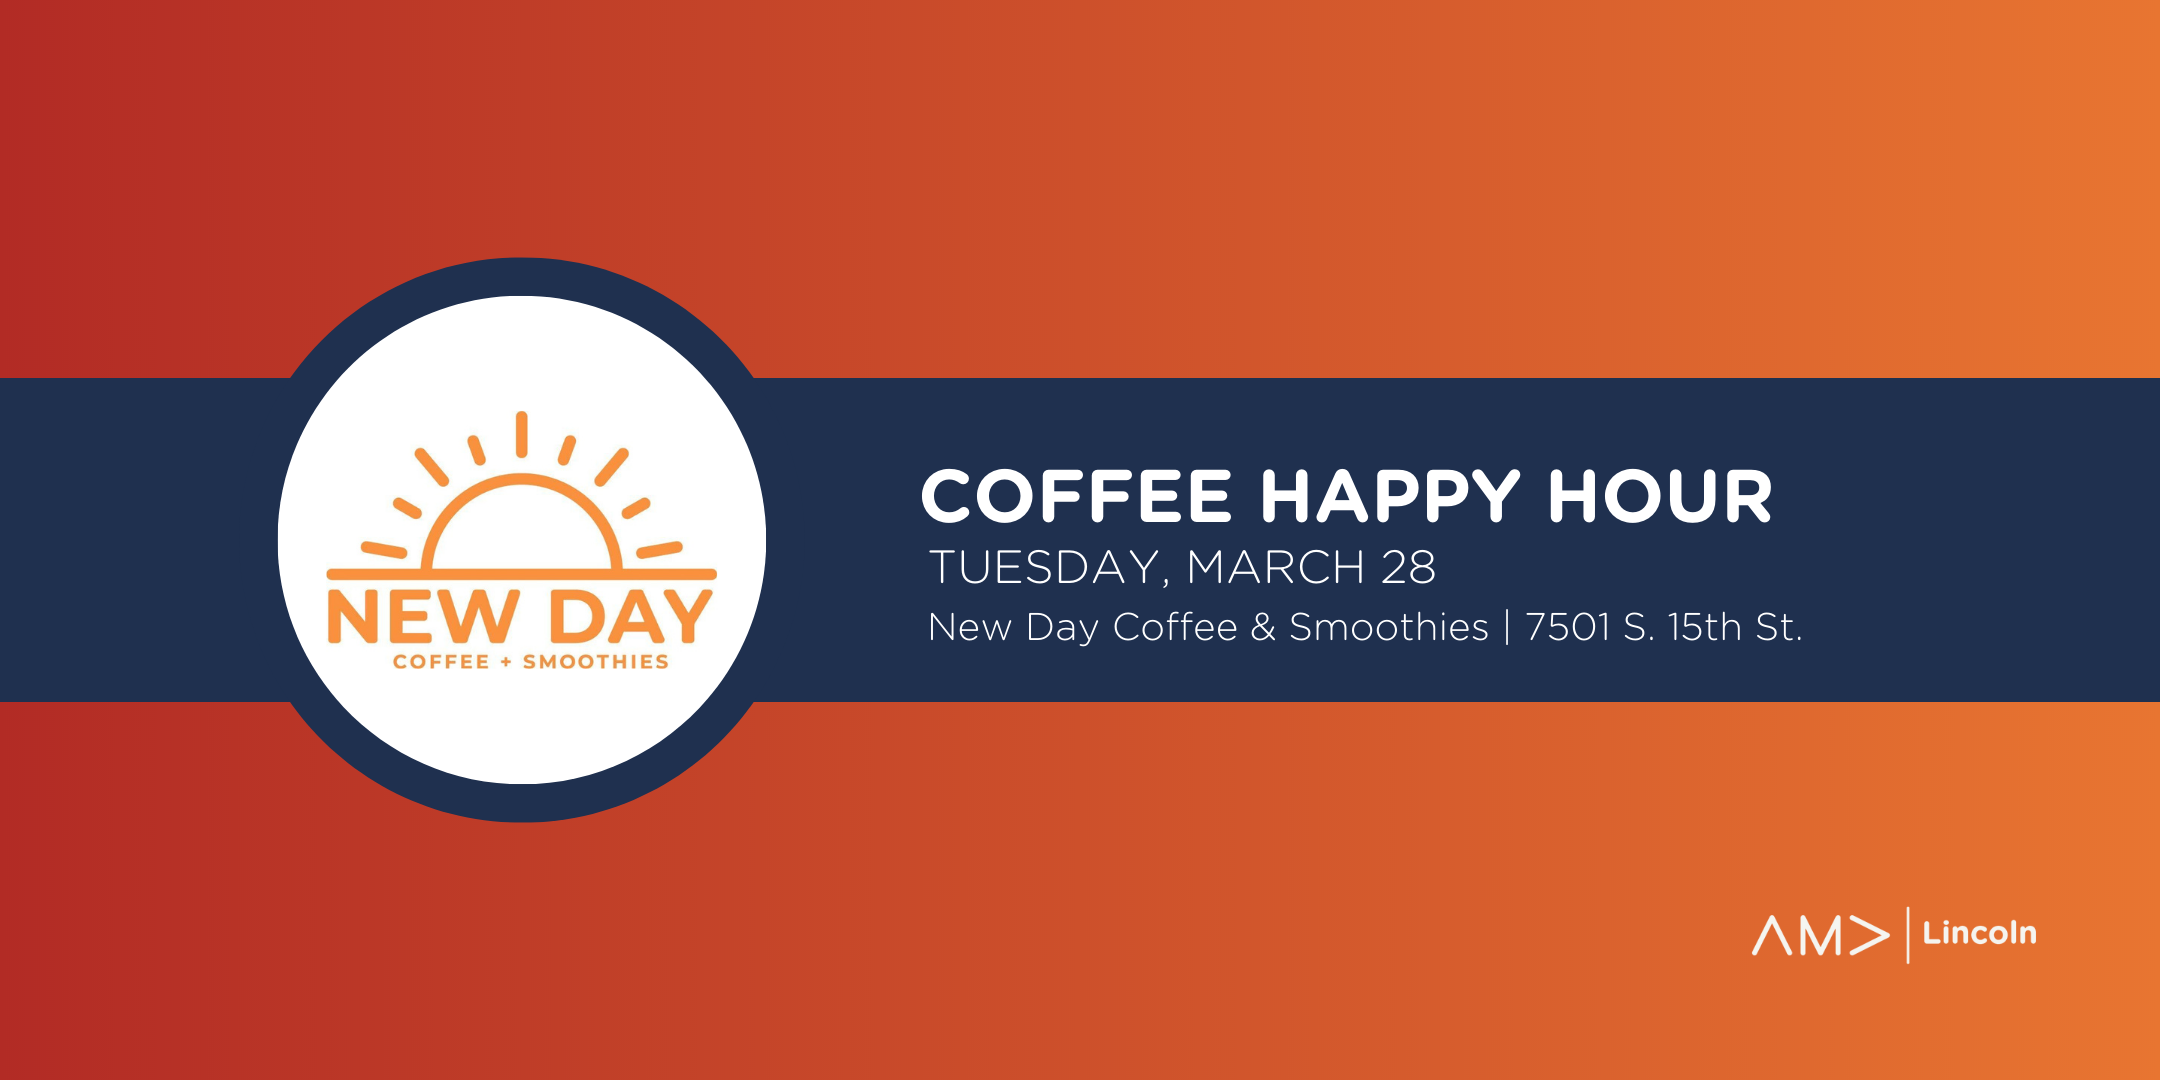 Cover Image for Coffee Happy Hour at New Day Coffee & Smoothies